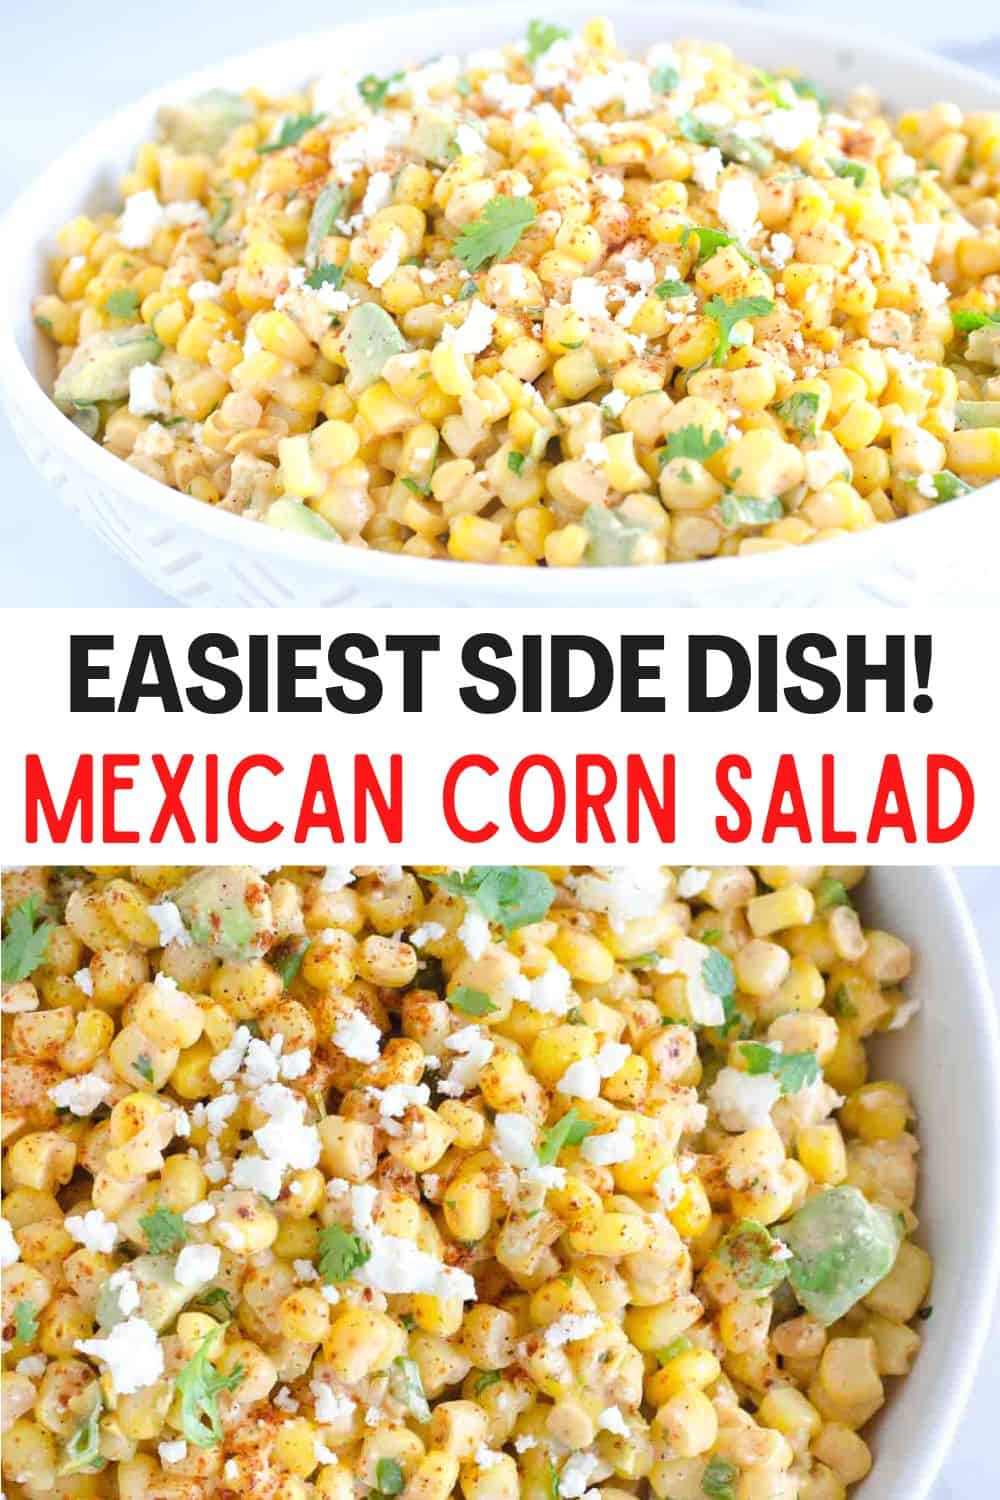 Our easy Mexican corn salad is a favorite Mexican side dish! Perfect for taco nights, barbecues, picnics or any family meal.